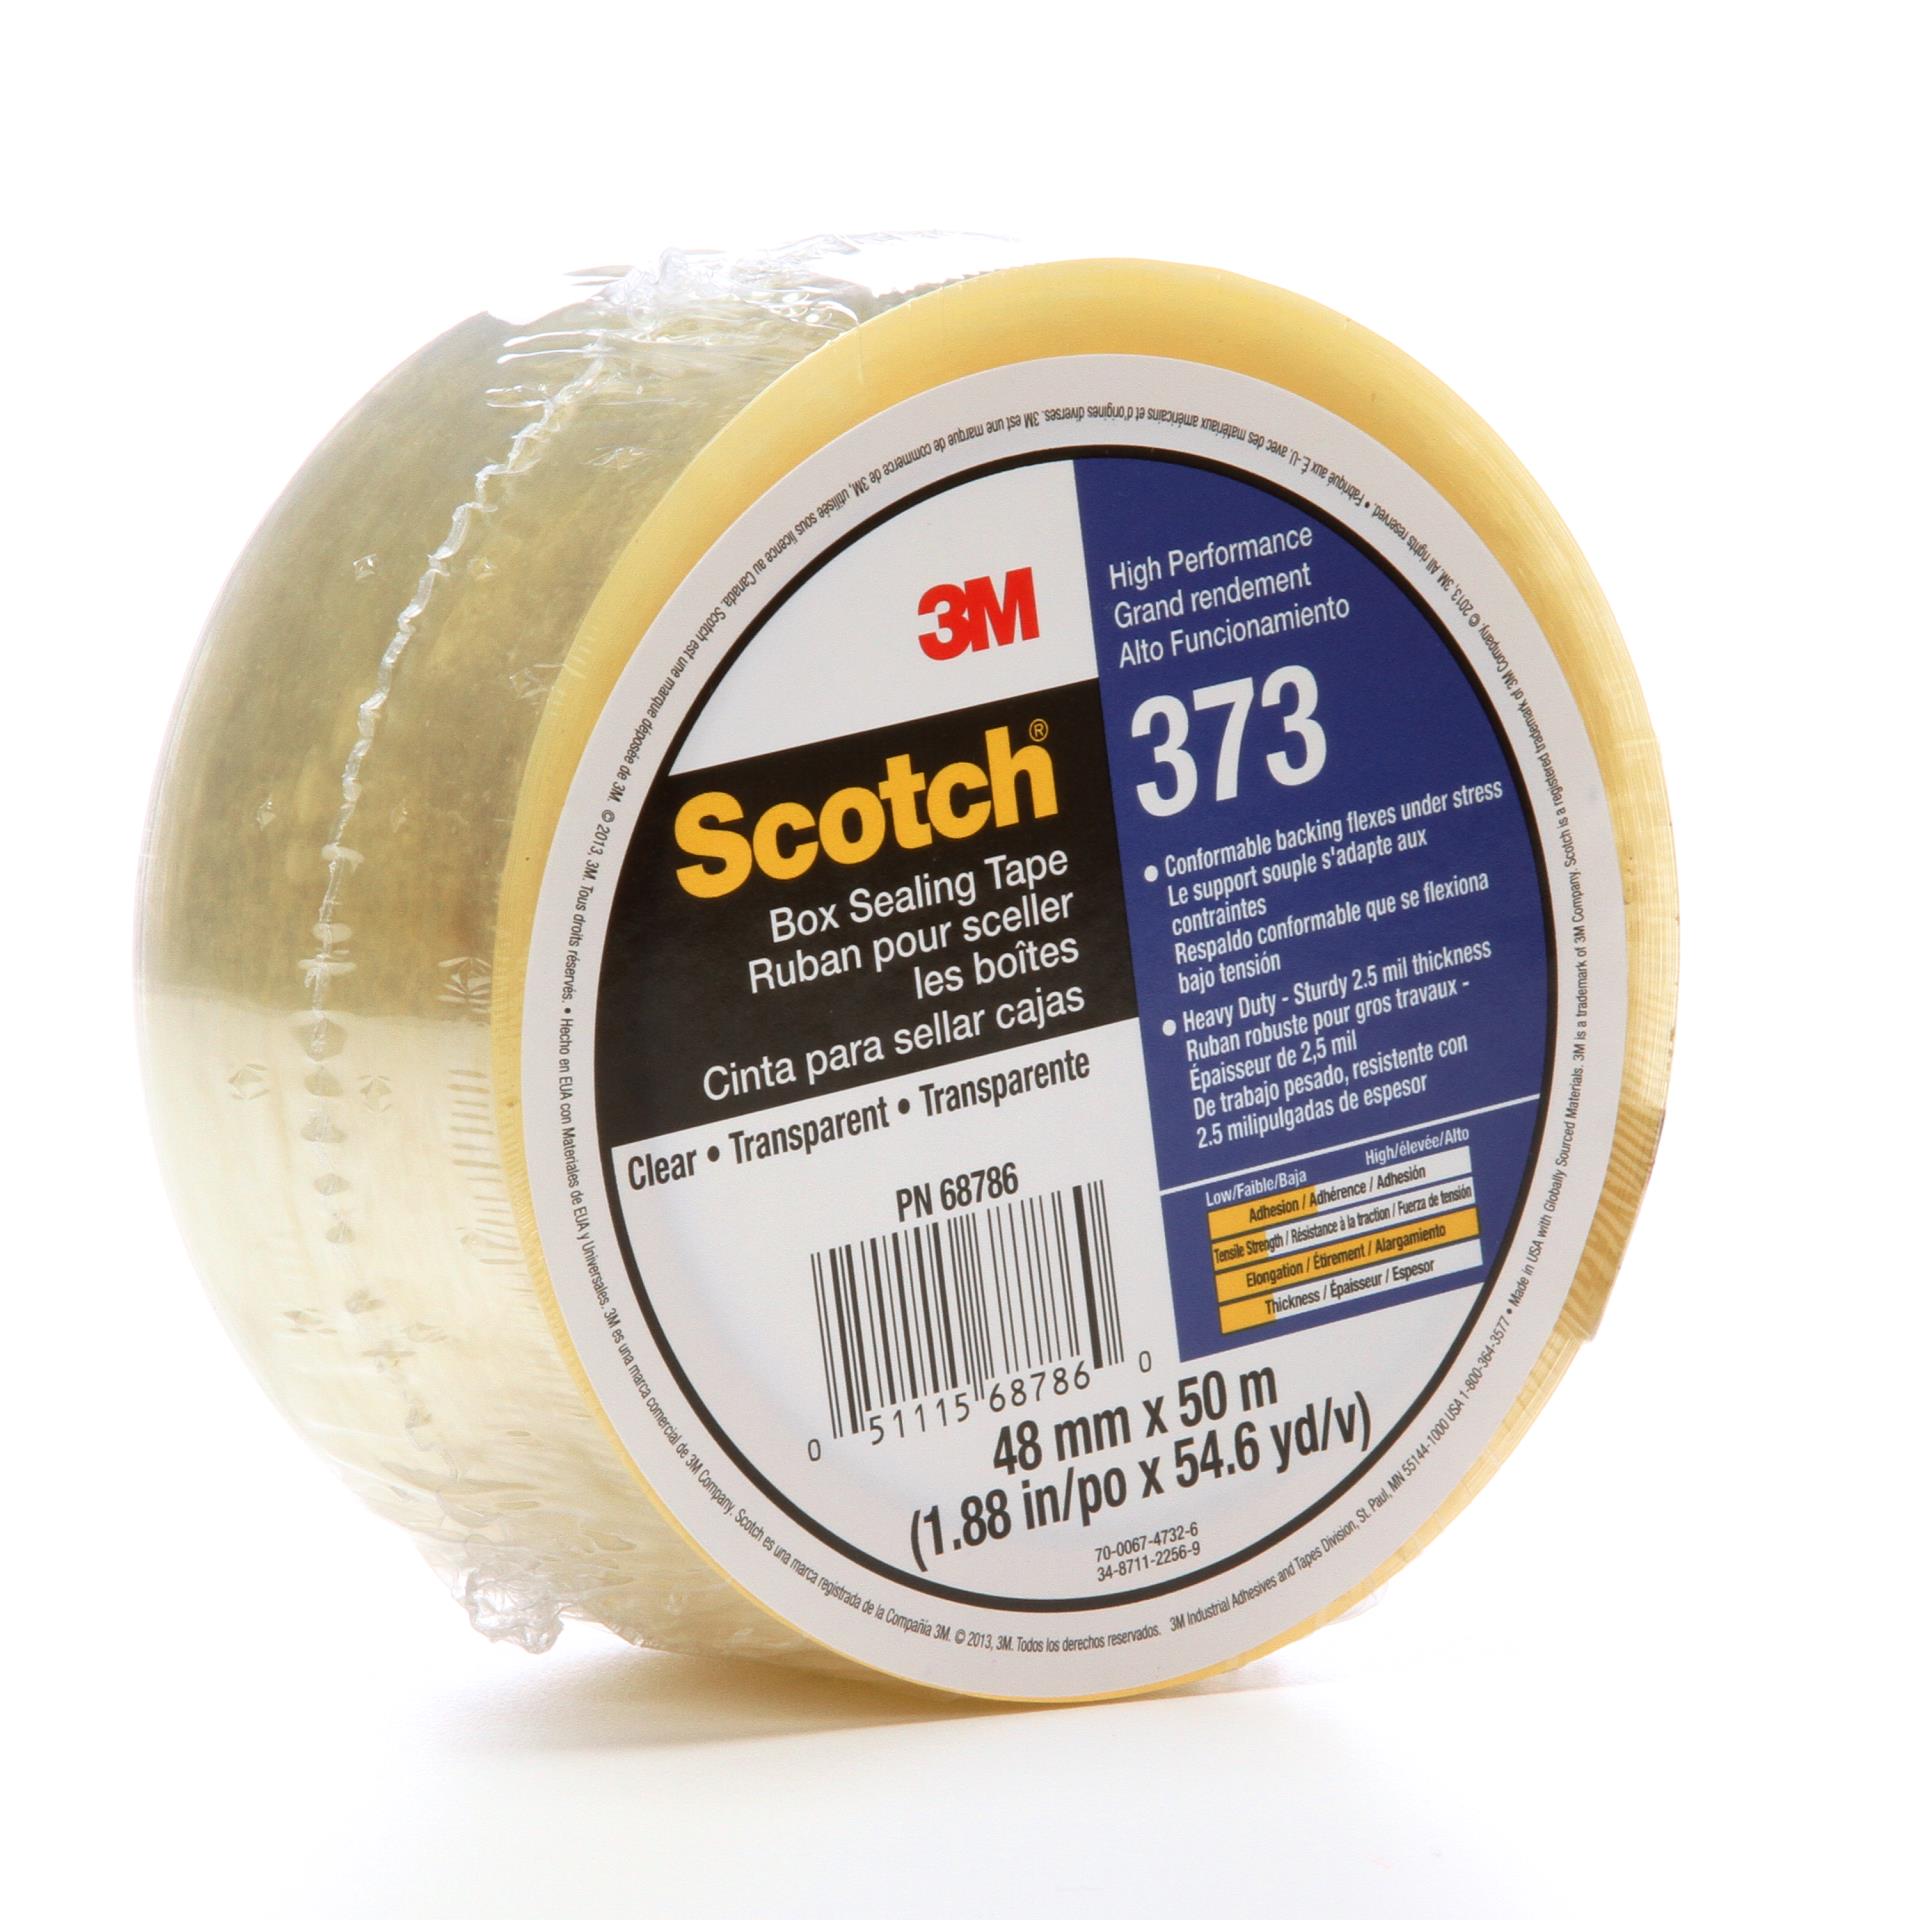 Scotch® Box Sealing Tape 373, Clear, 48 mm x 50 m, 36 per case,  Individually Wrapped Conveniently Packaged